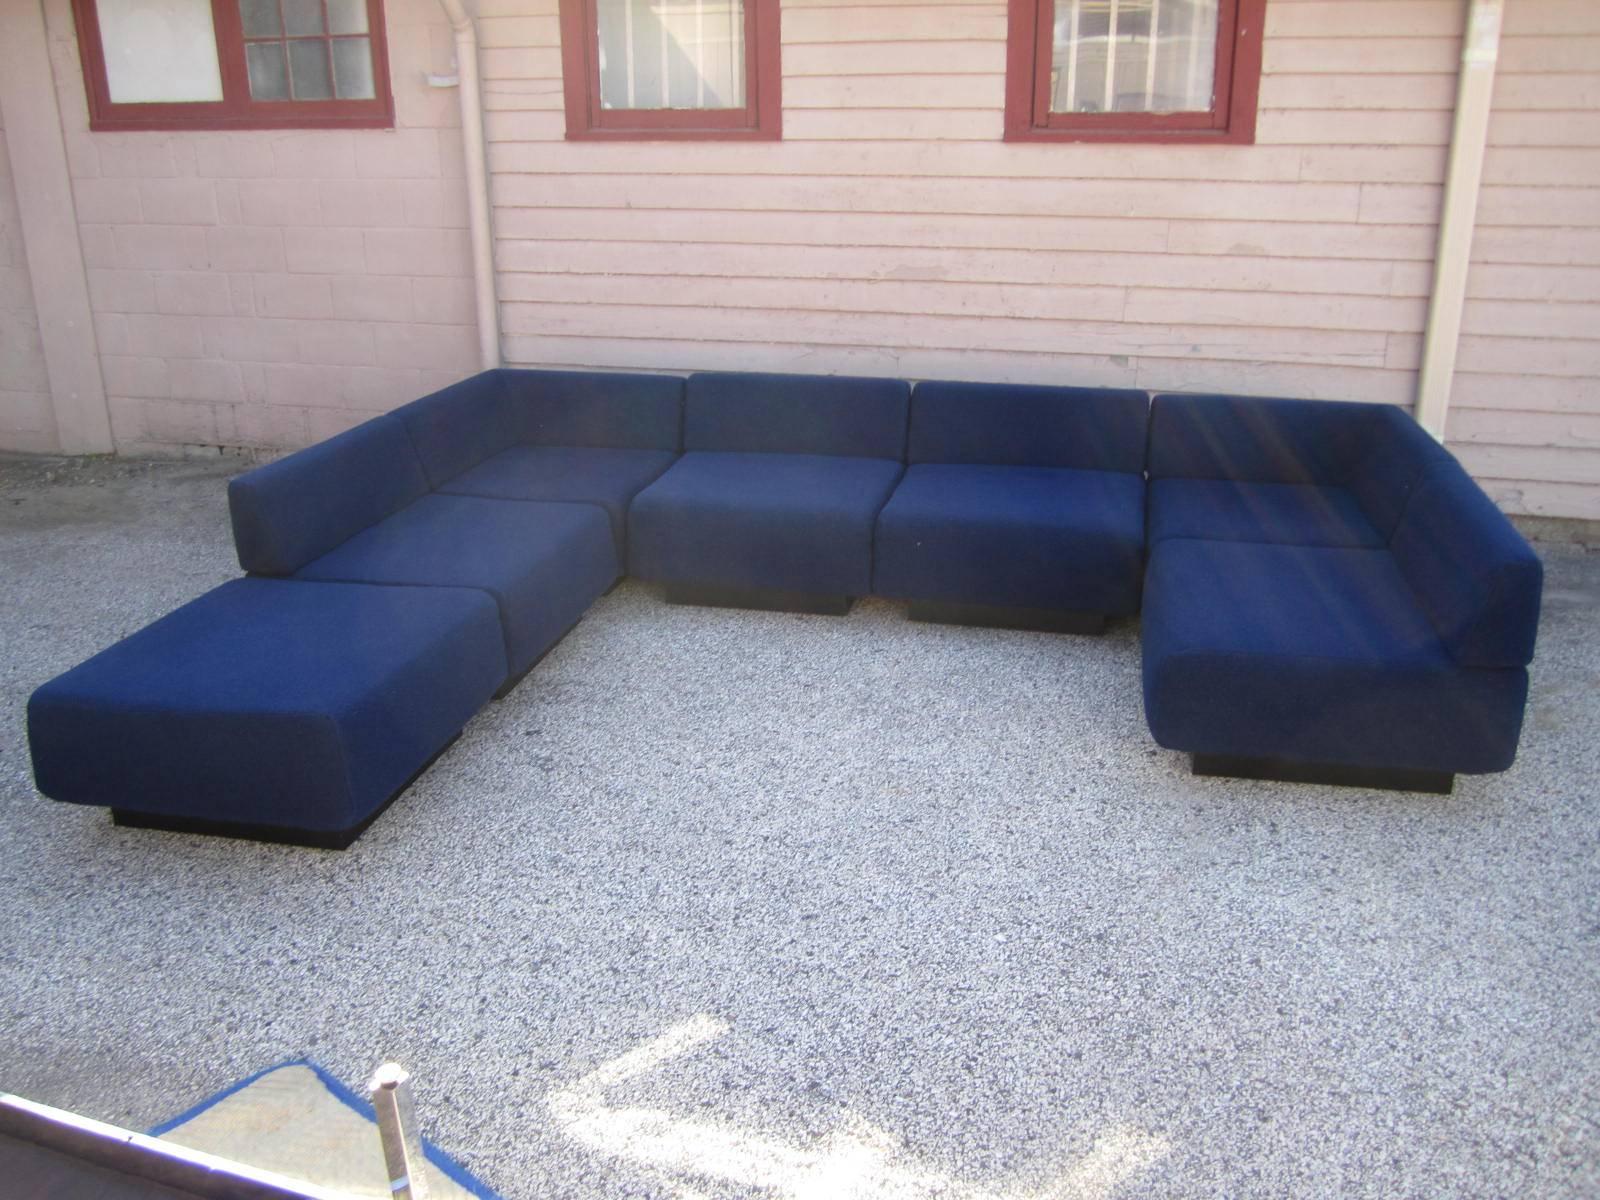 Cubo sectional sofa designed by Harvey Probber. Measurements are per piece. Seven sections comprised of, four straight, two corners and one ottoman. Measures: Seat height 16